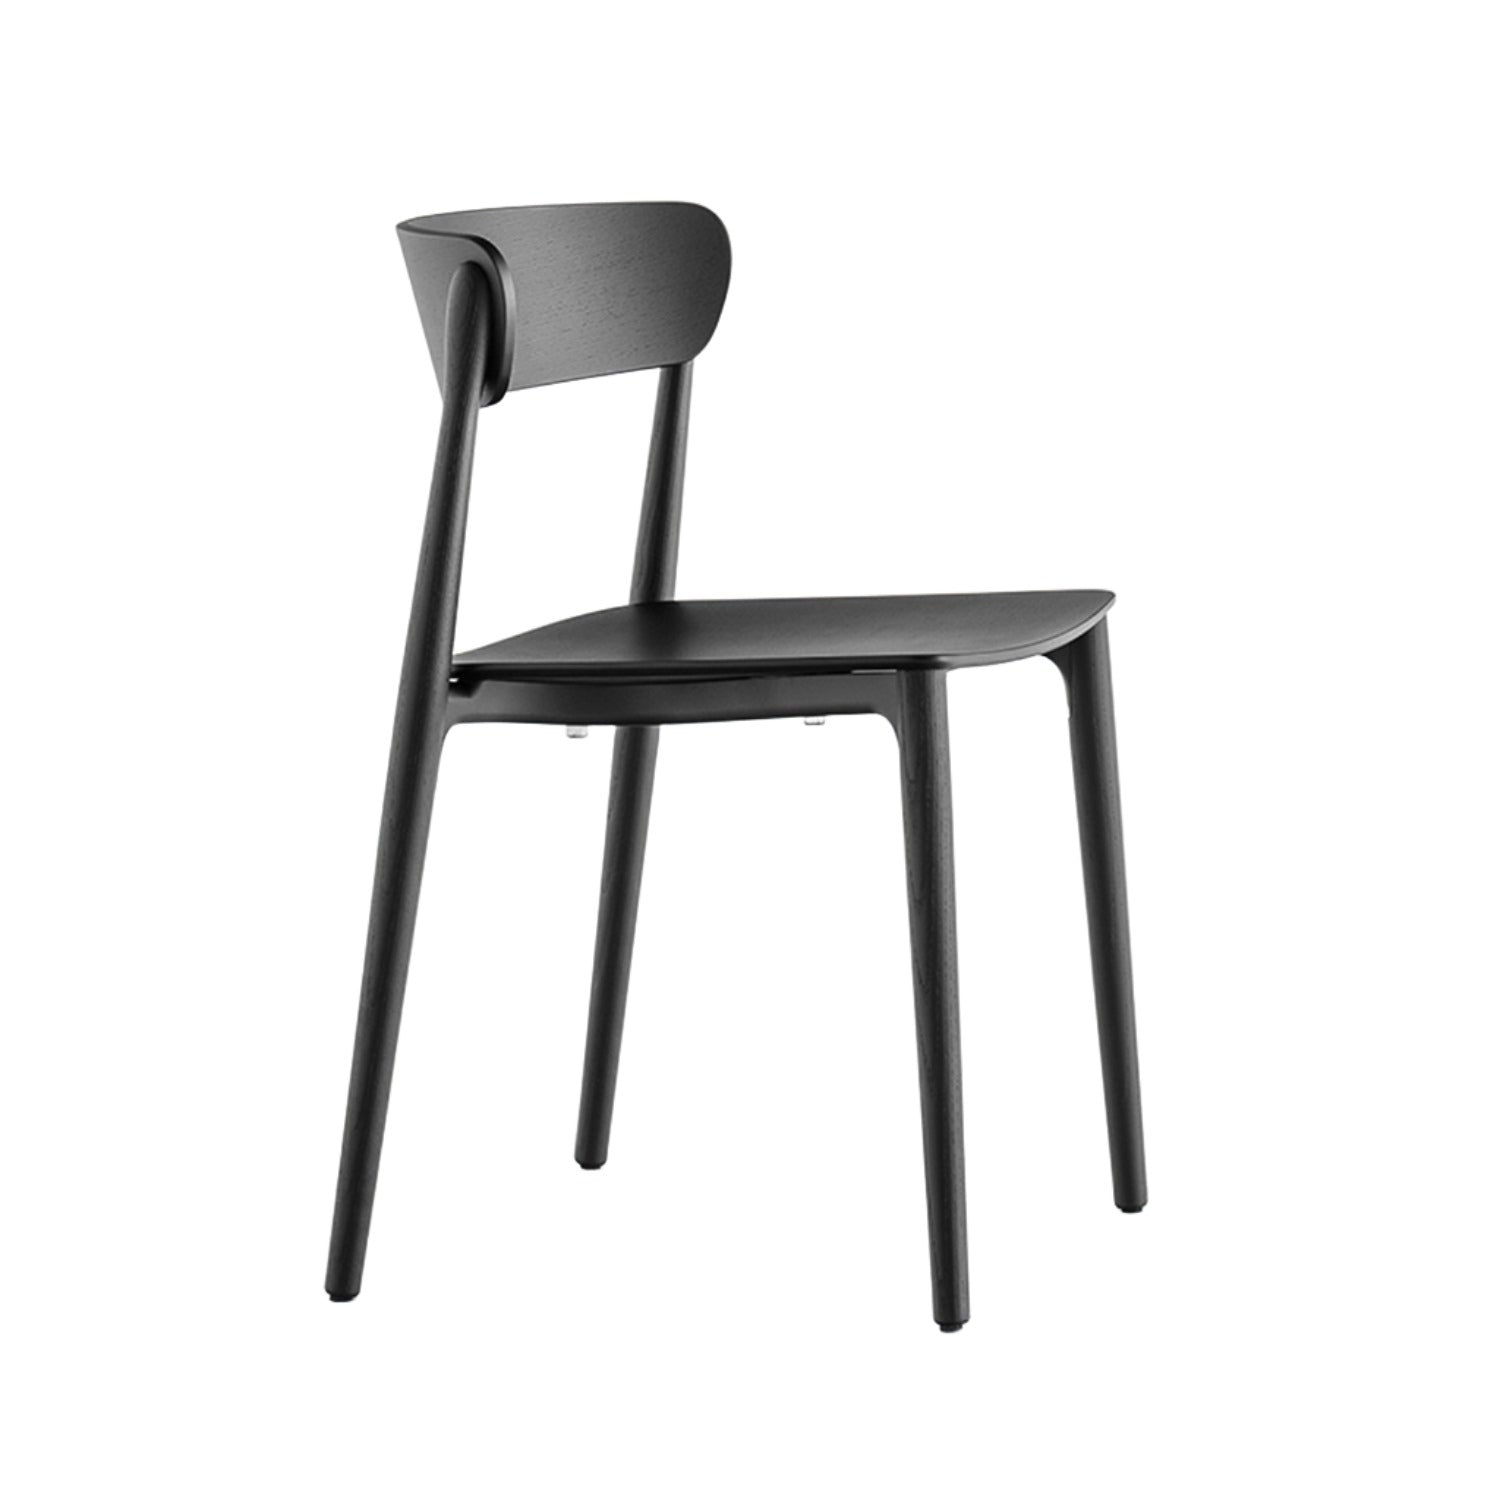 Pedrali Nemea 2820 dining chair in black angle view